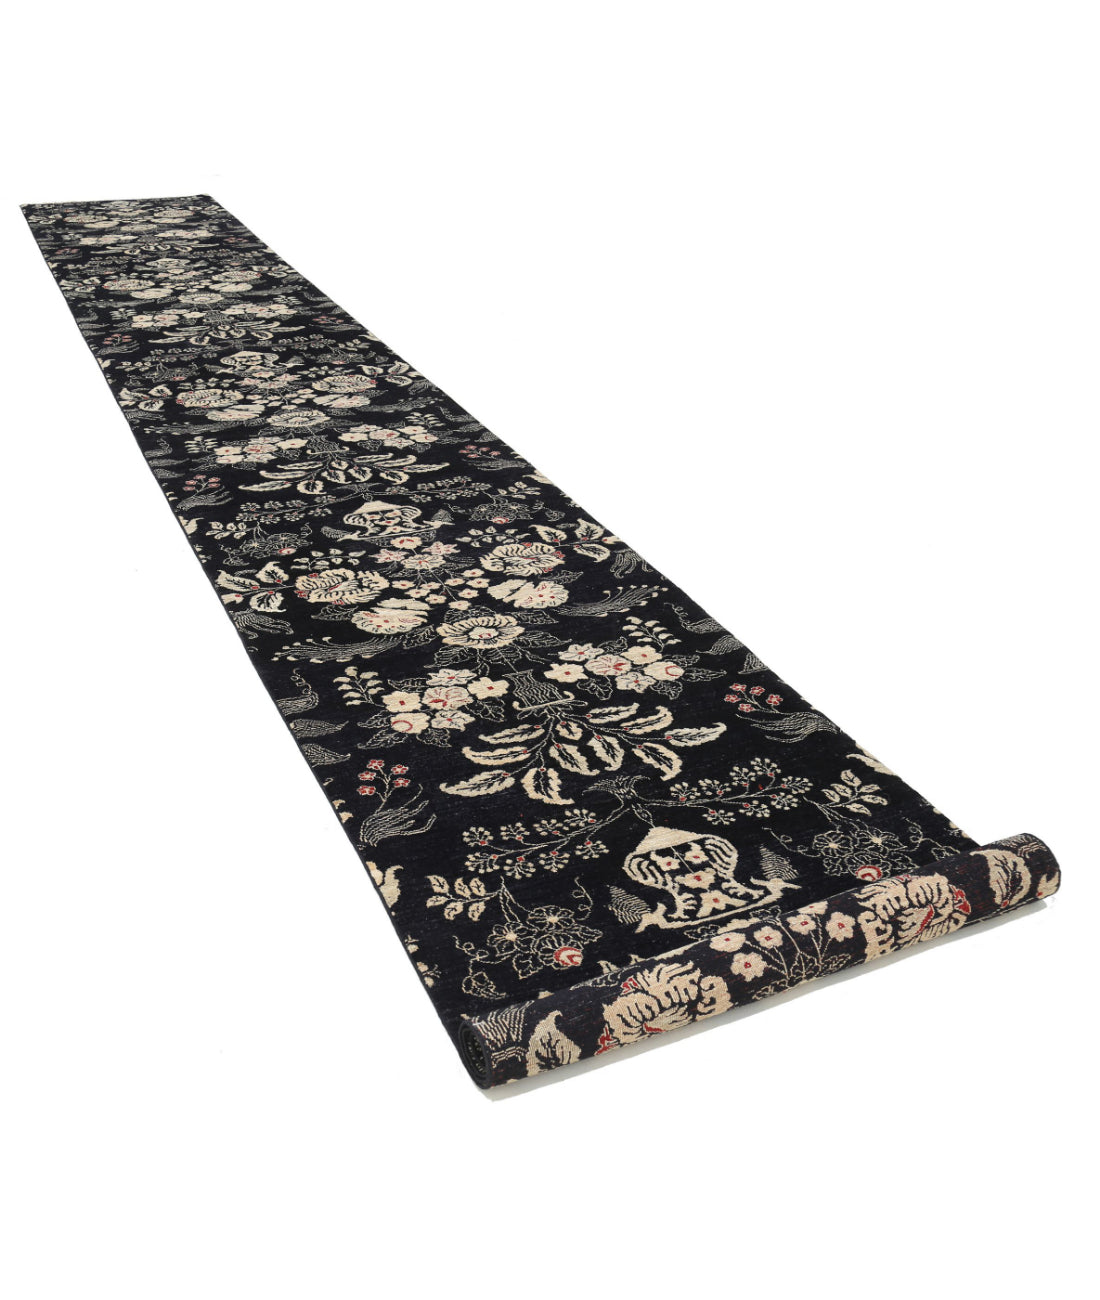 Hand Knotted Artemix Wool Rug - 3'6'' x 22'9'' 3'6'' x 22'9'' (105 X 683) / Black / Ivory